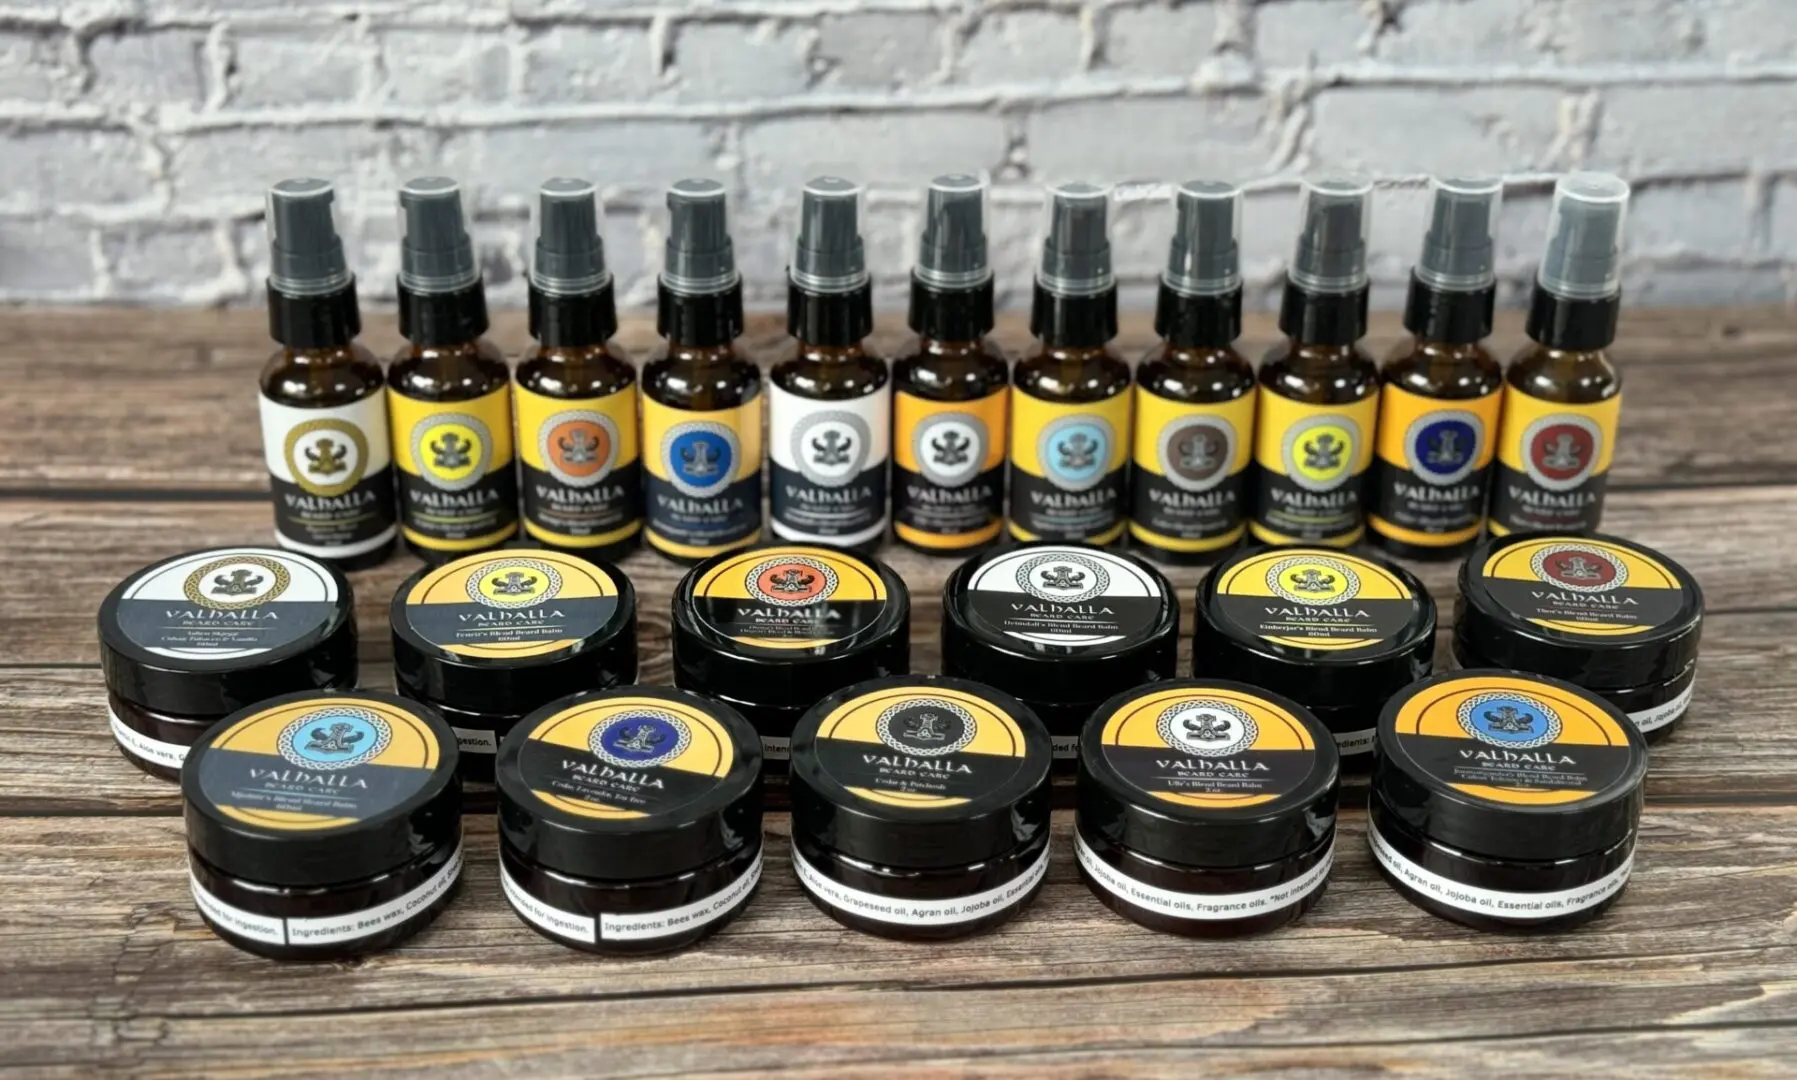 A table with many different types of beard oils and wax.